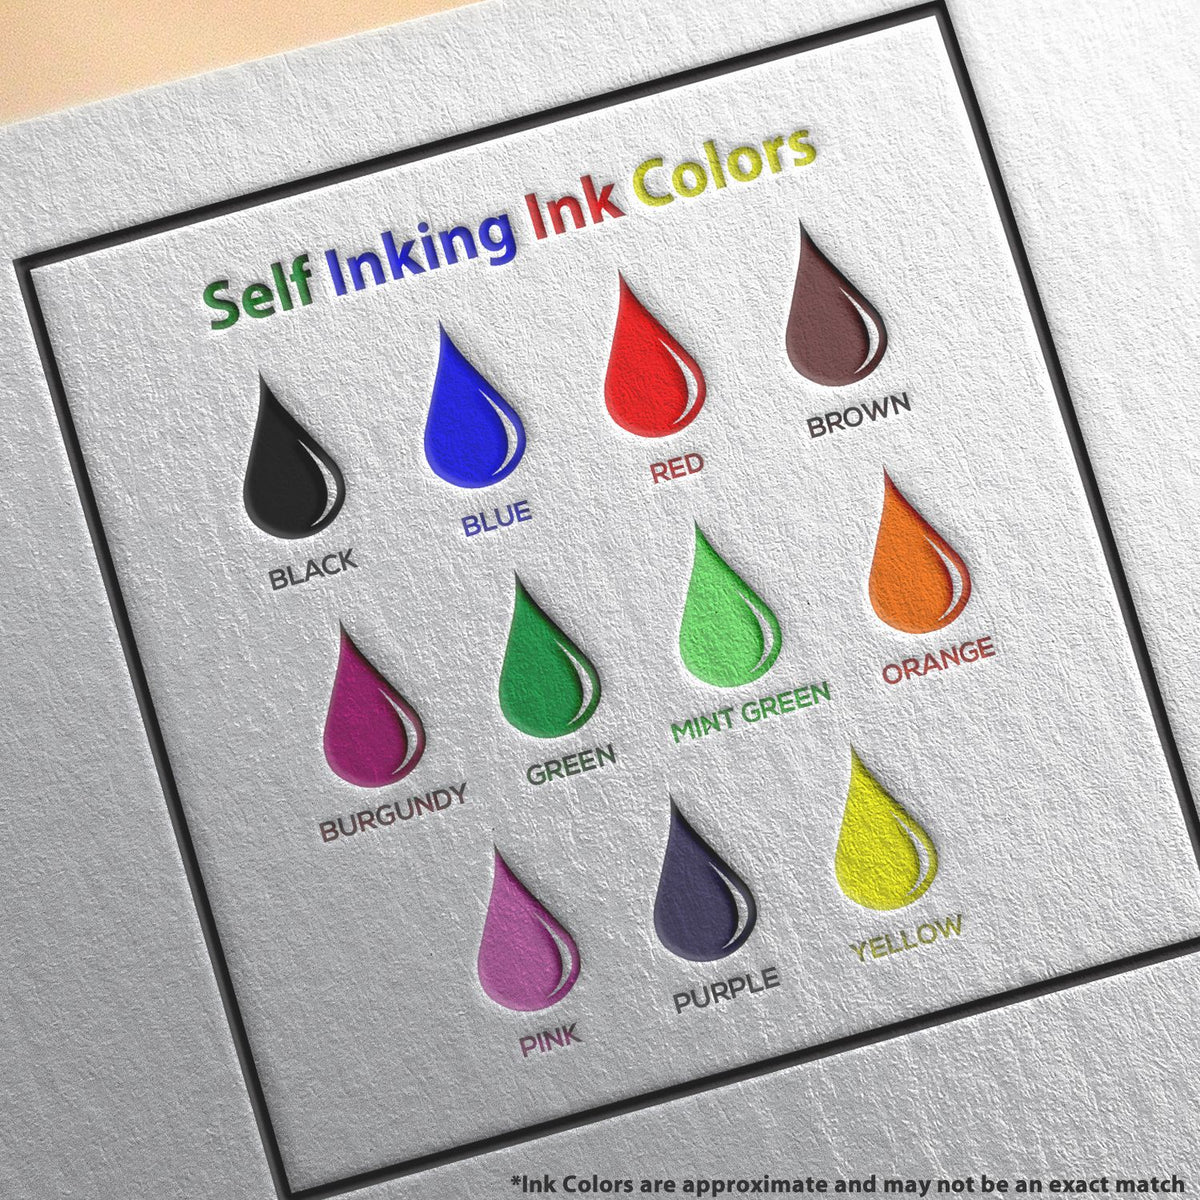 A picture showing the different ink colors or hues available for the Self-Inking Hawaii Landscape Architect Stamp product.